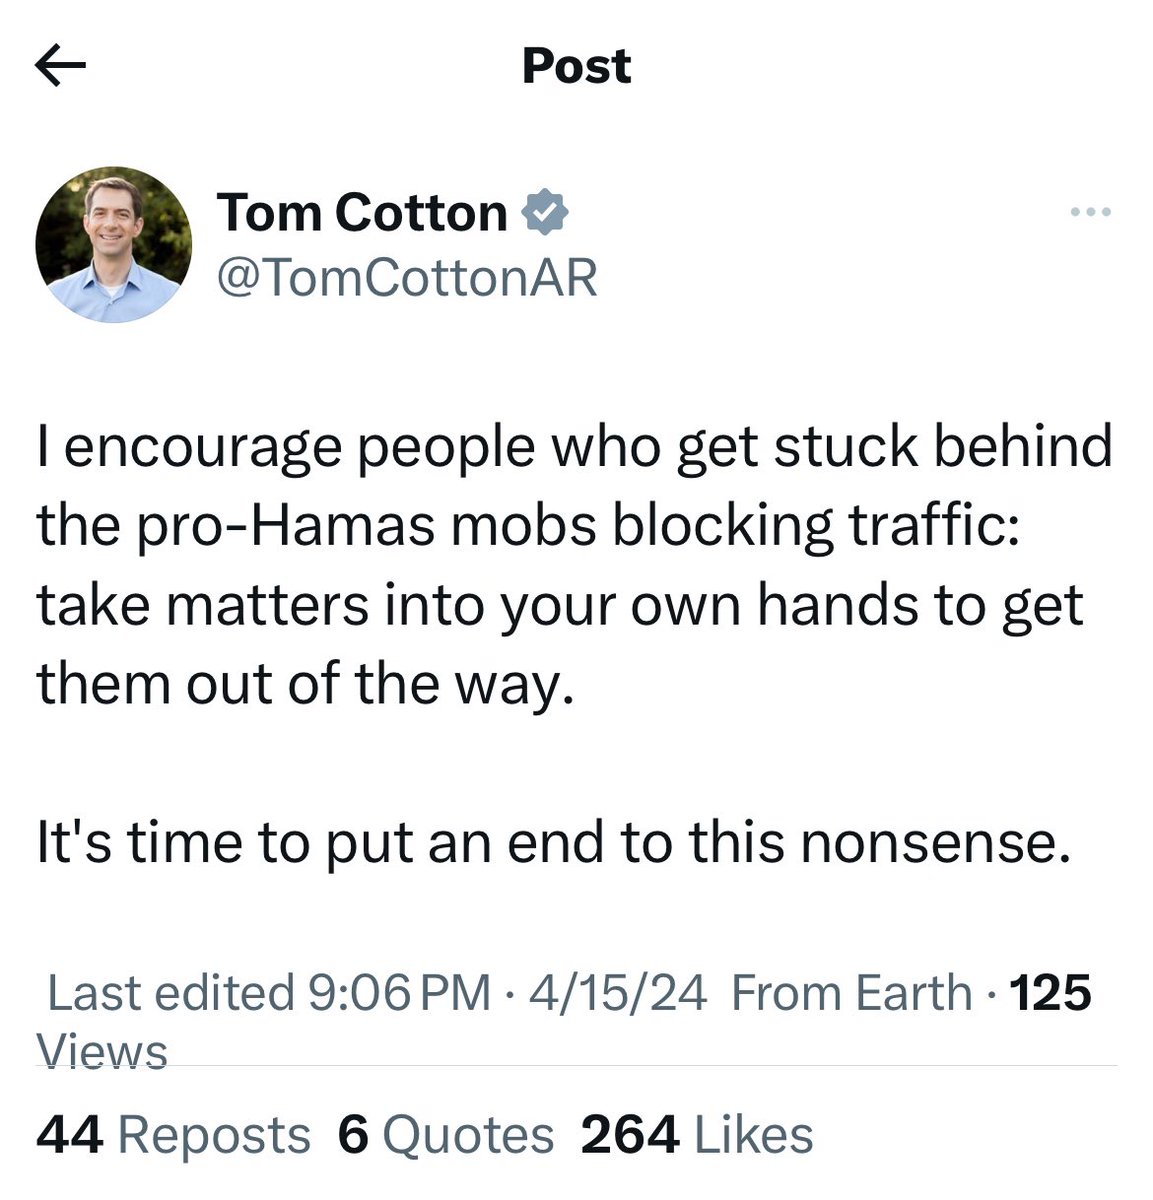 A United States senator, Tom Cotton (R-Ark.), just tweeted that people inconvenienced by demonstrators should “take matters into your own hands.” A few minutes later the tweet was edited.